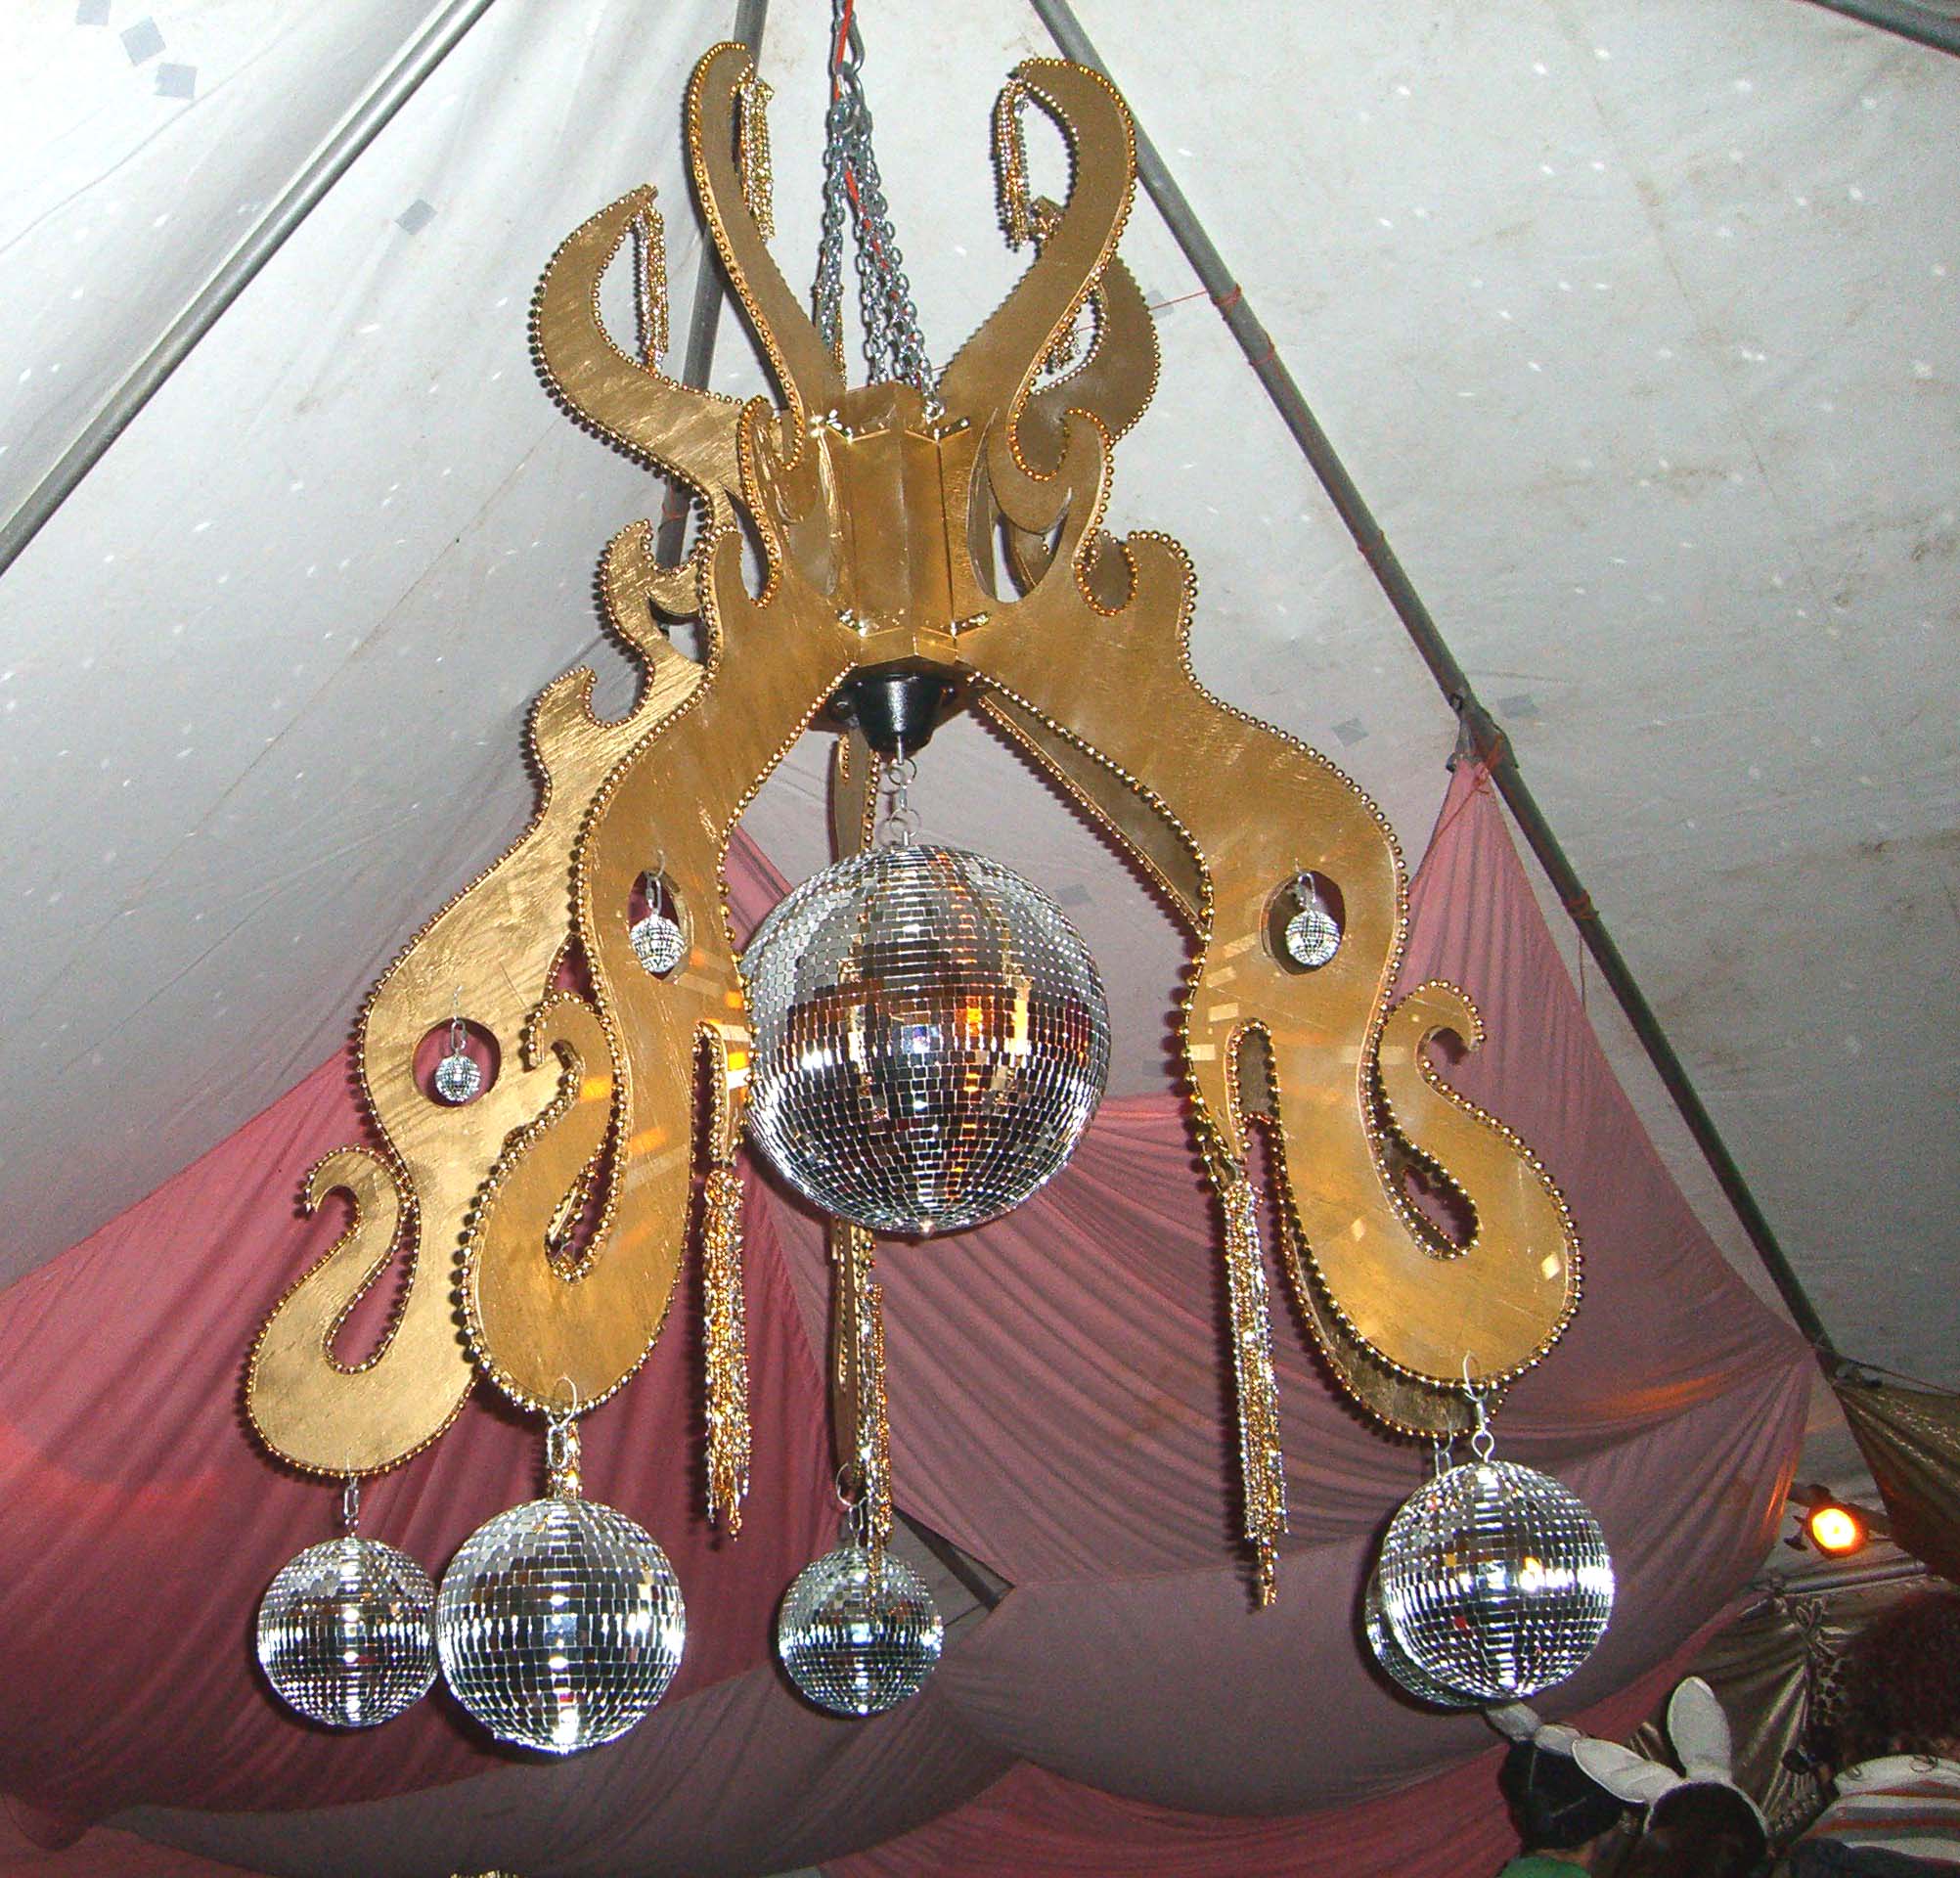 A decoration of a dance tent in the Ish camp